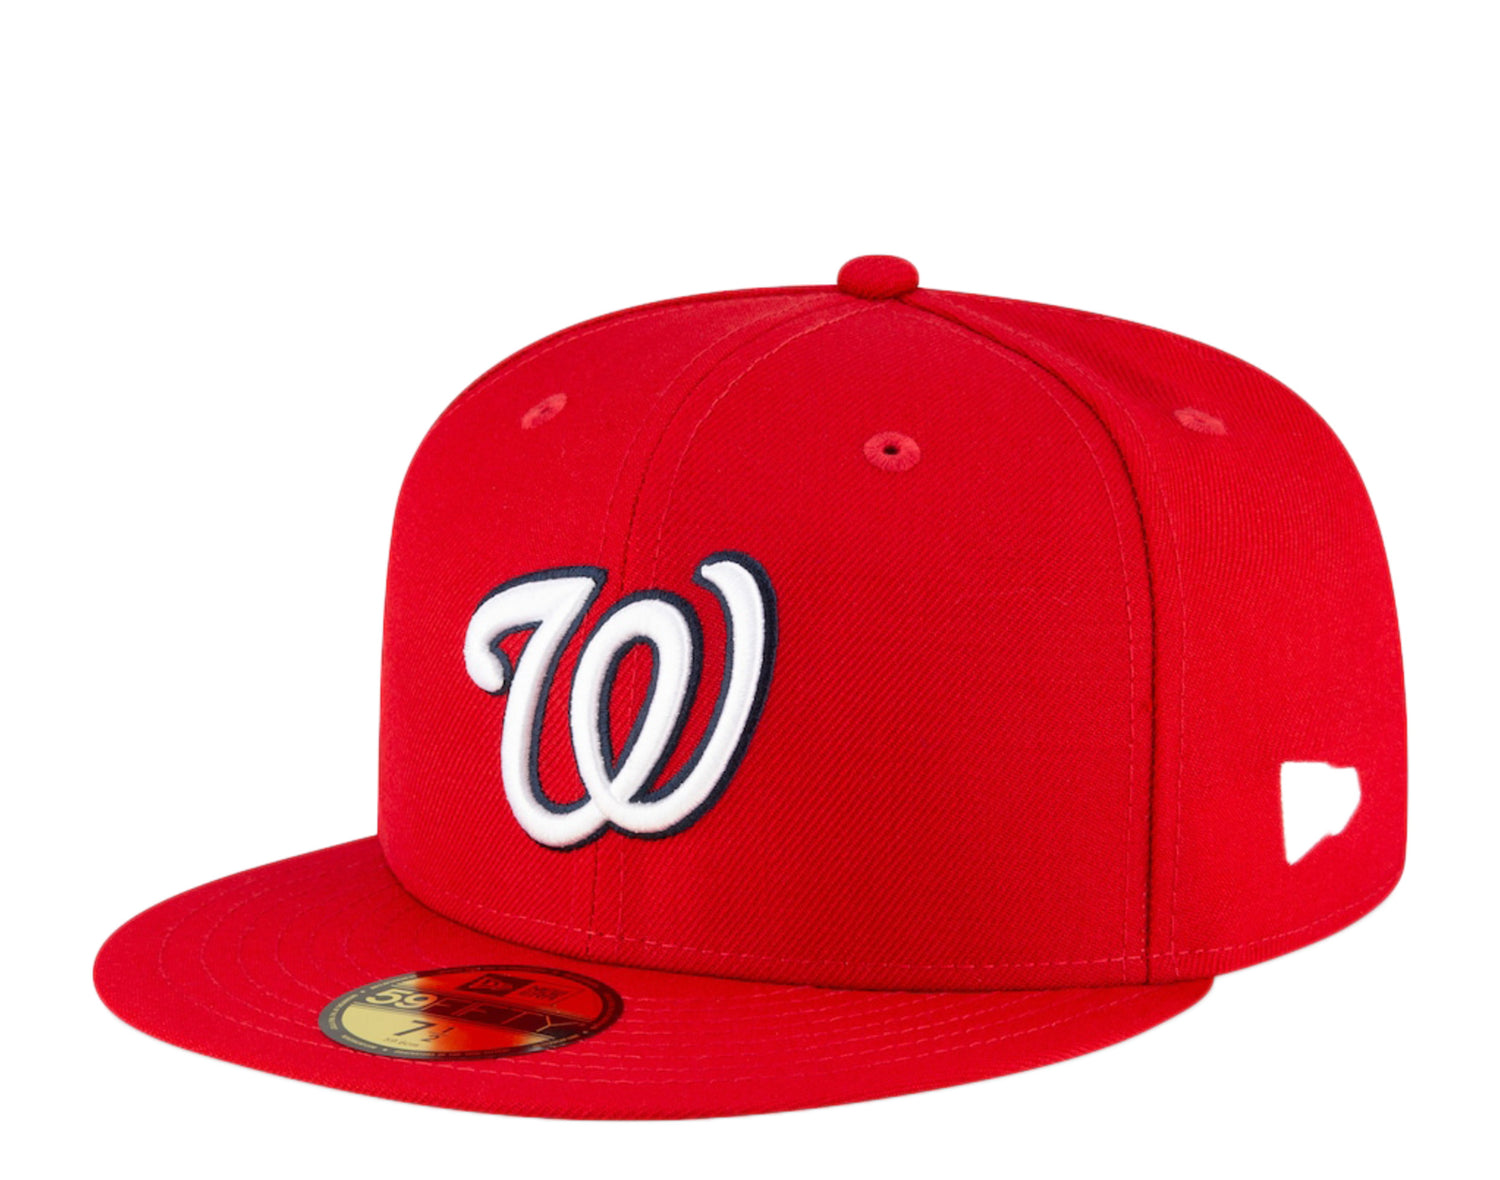 New Era 59Fifty MLB Washington Nationals 2019 World Series Fitted Hat